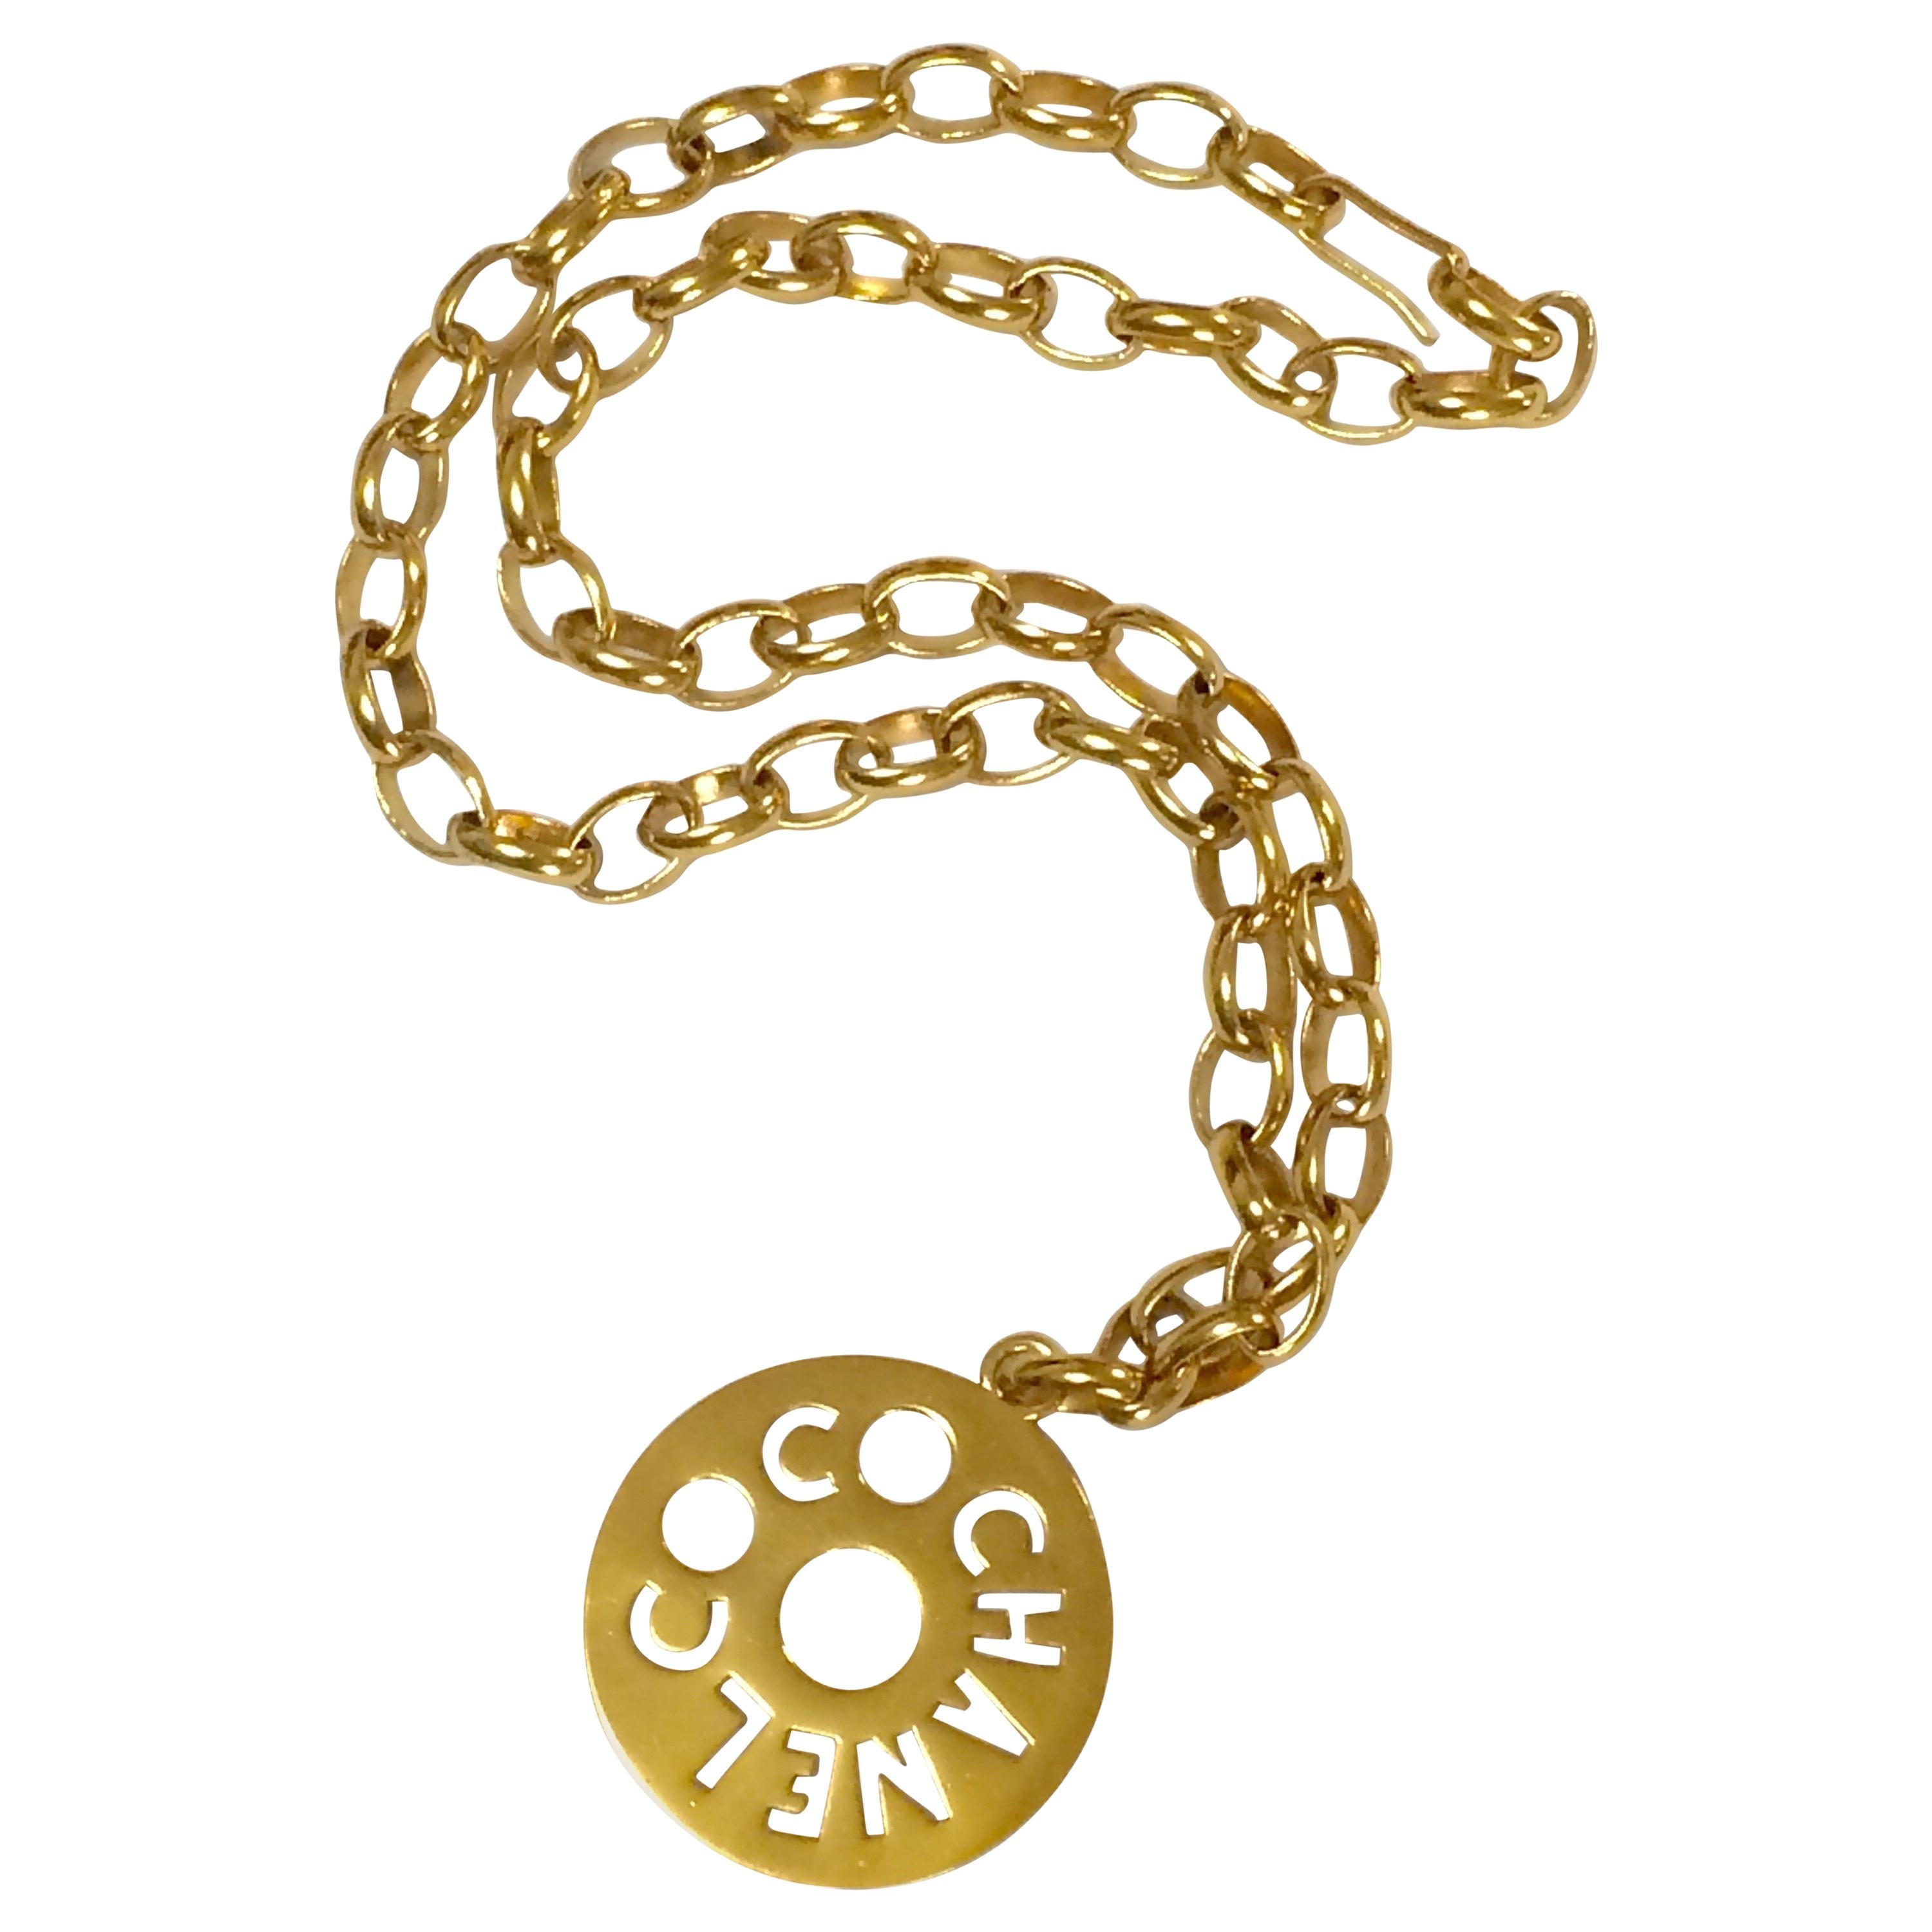 Vintage CHANEL golden chain necklace, chain belt with round logo COCO top. For Sale